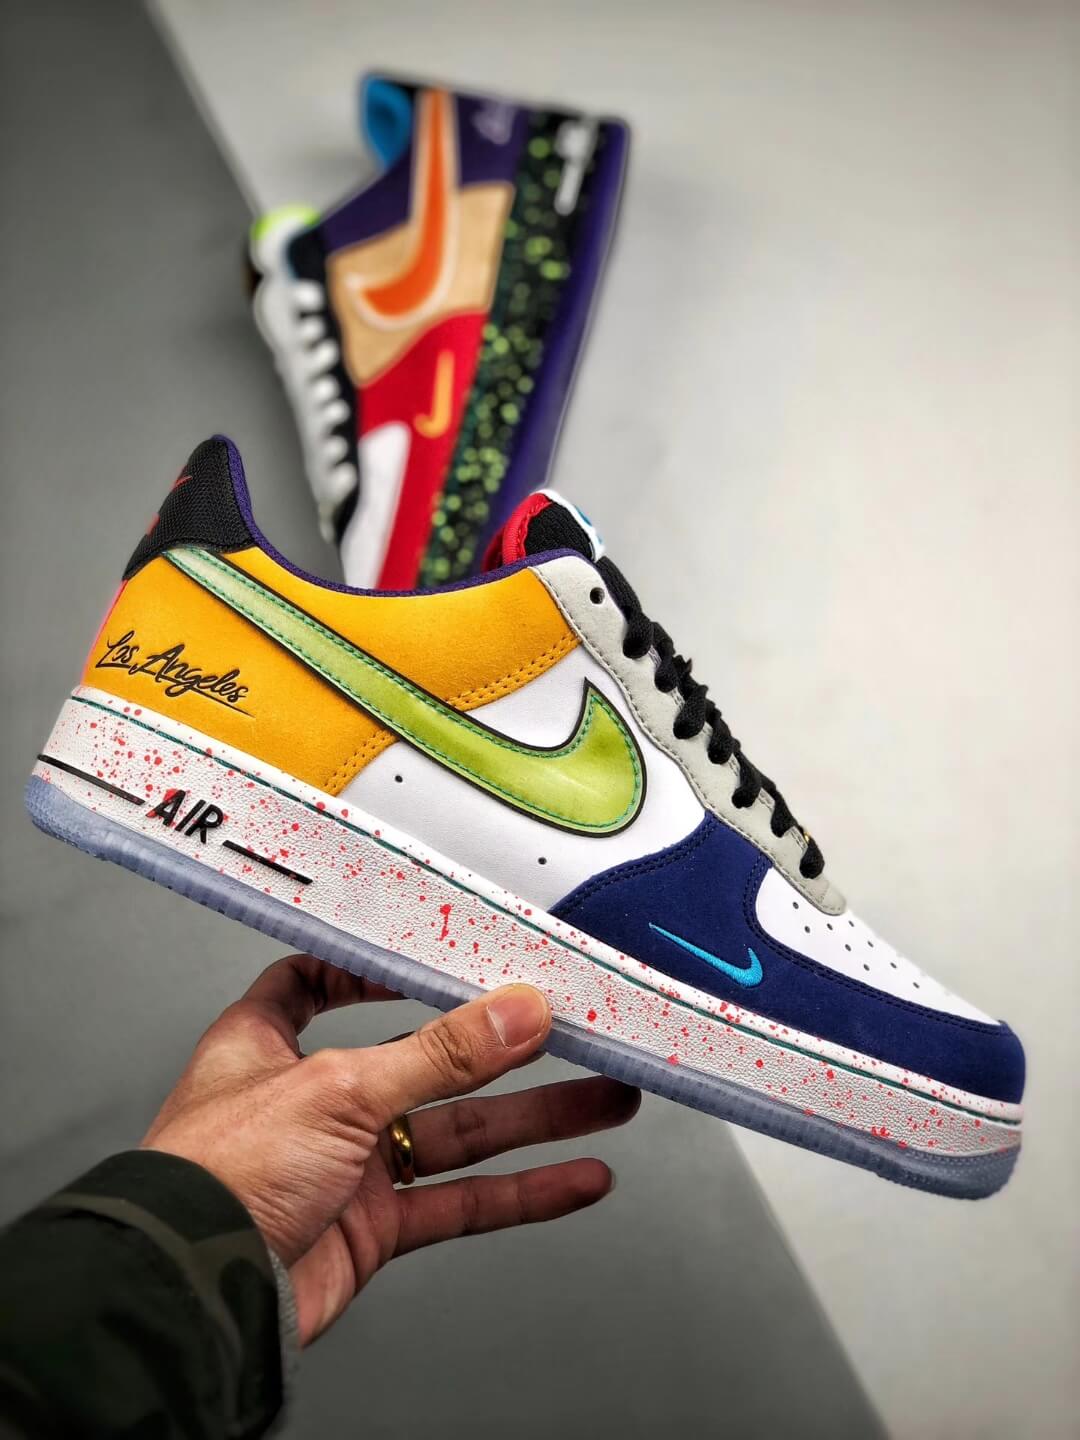 The Nike Air Force 1 07 LV8 What The LA Multi Color Sneaker Top Replica Shoes 02